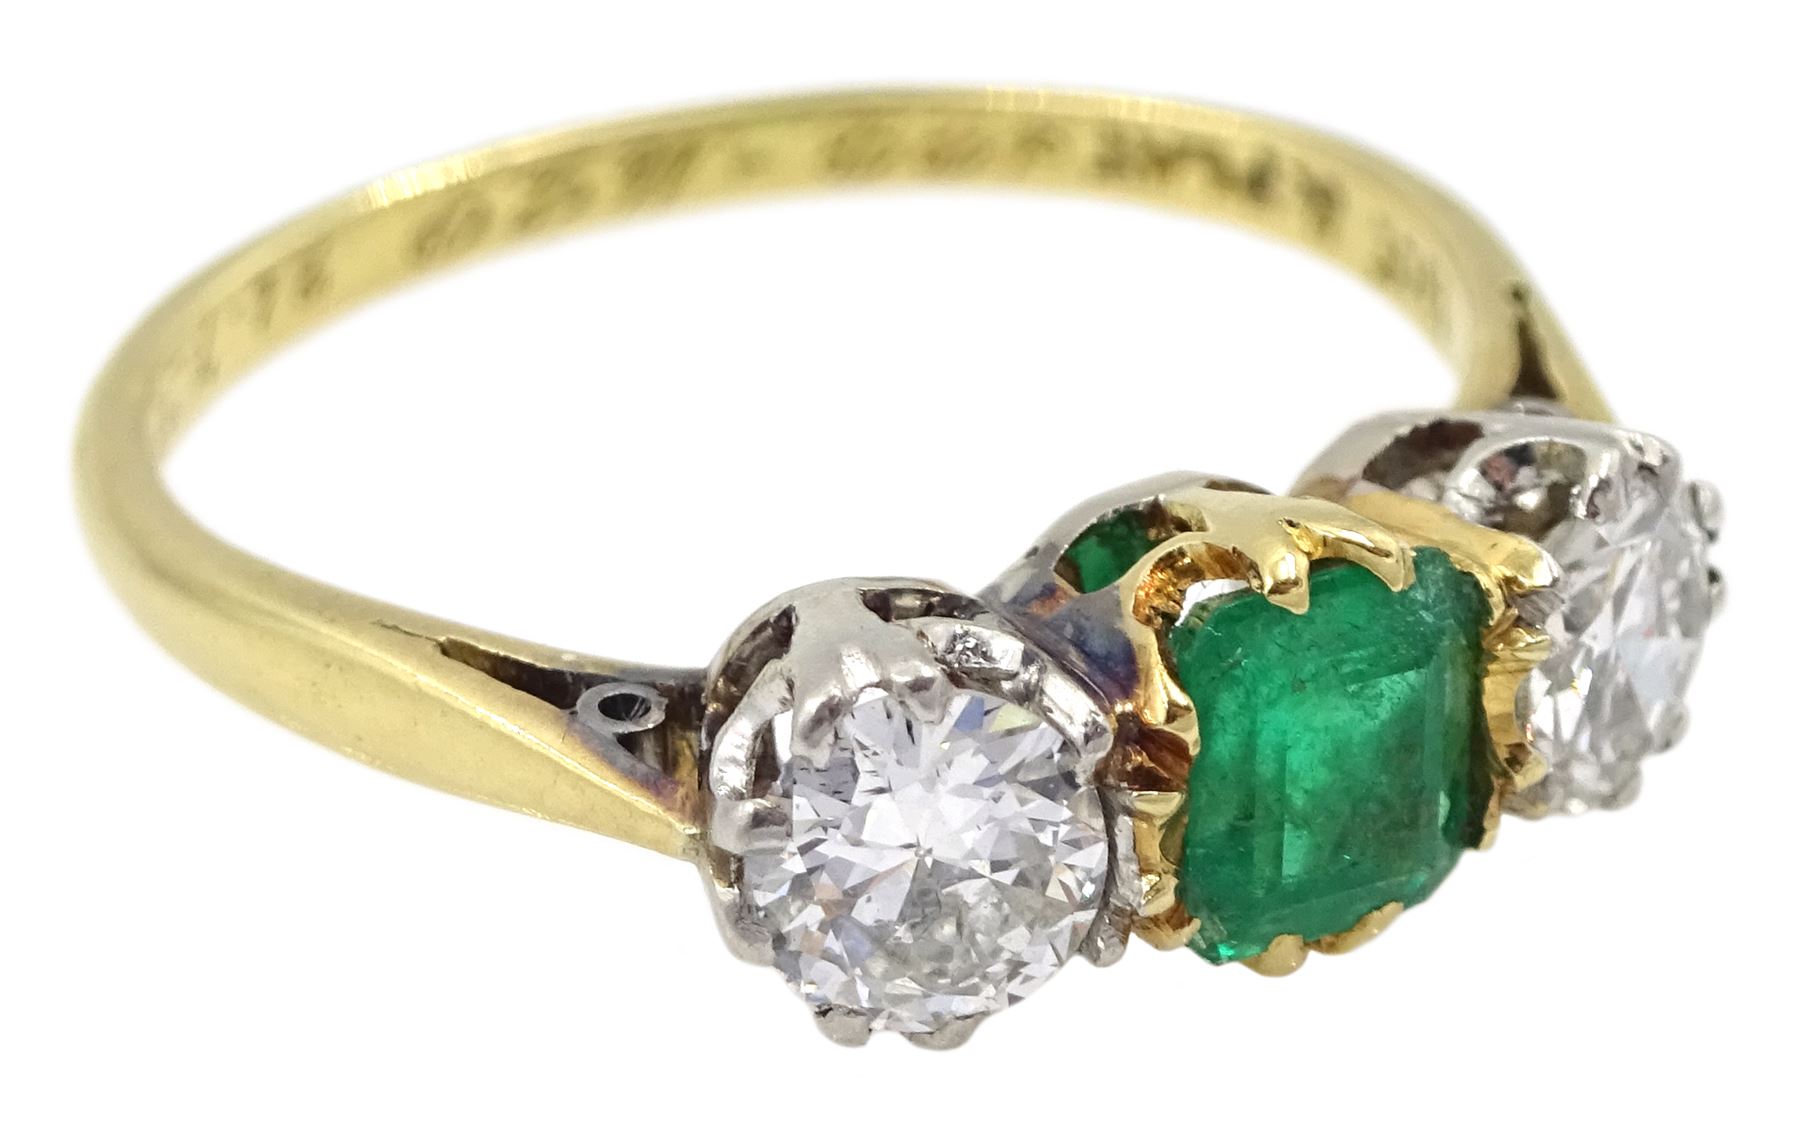 Early 20th century gold three stone old cut diamond and emerald ring - Image 3 of 7